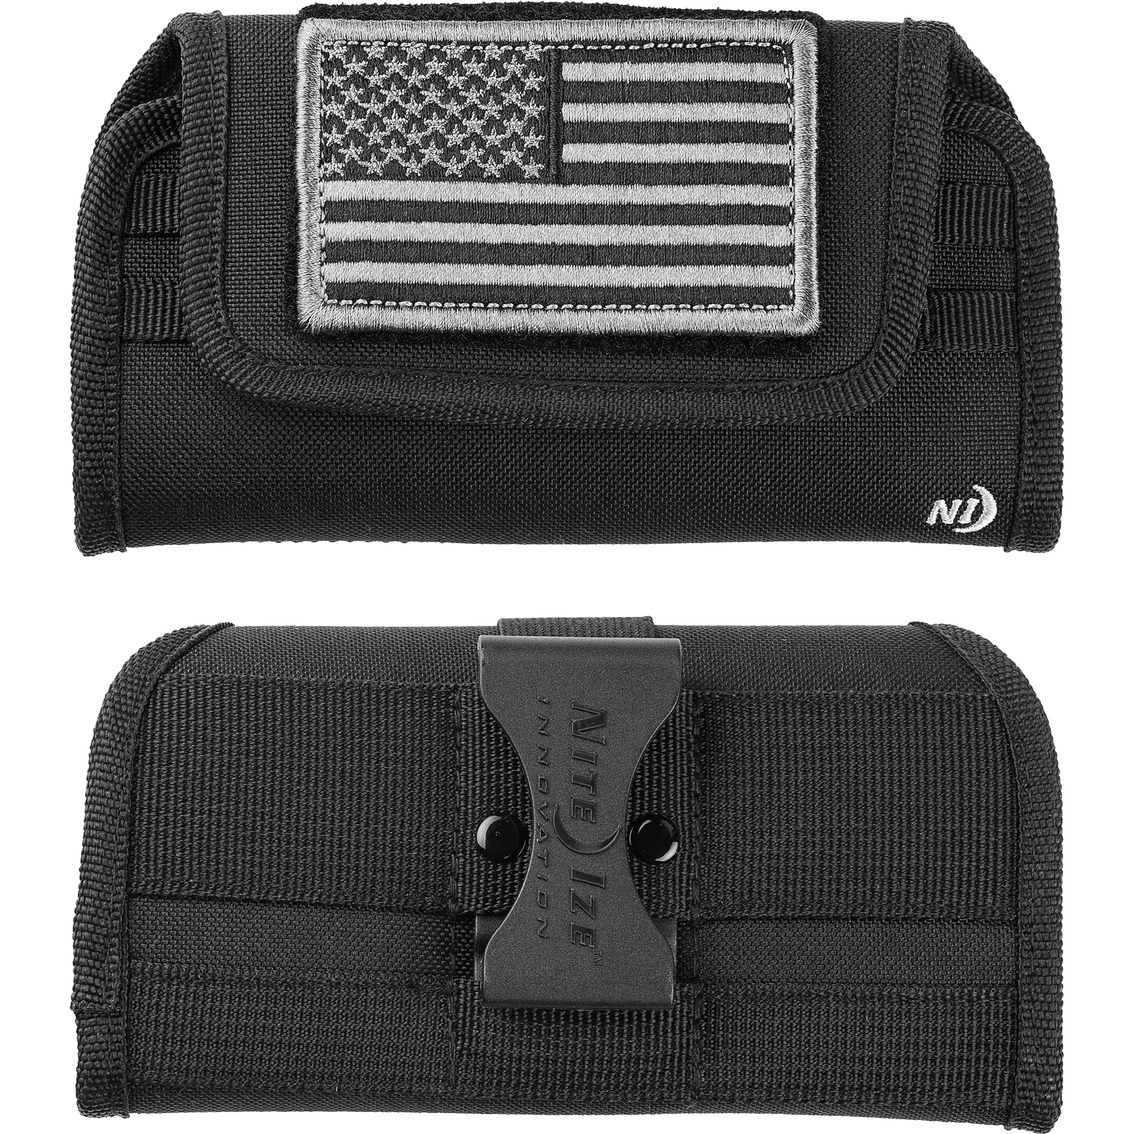 Nite Ize Clip Case Horizontal Universal Phone Holster, XL, USA Patch - Image 3 of 5